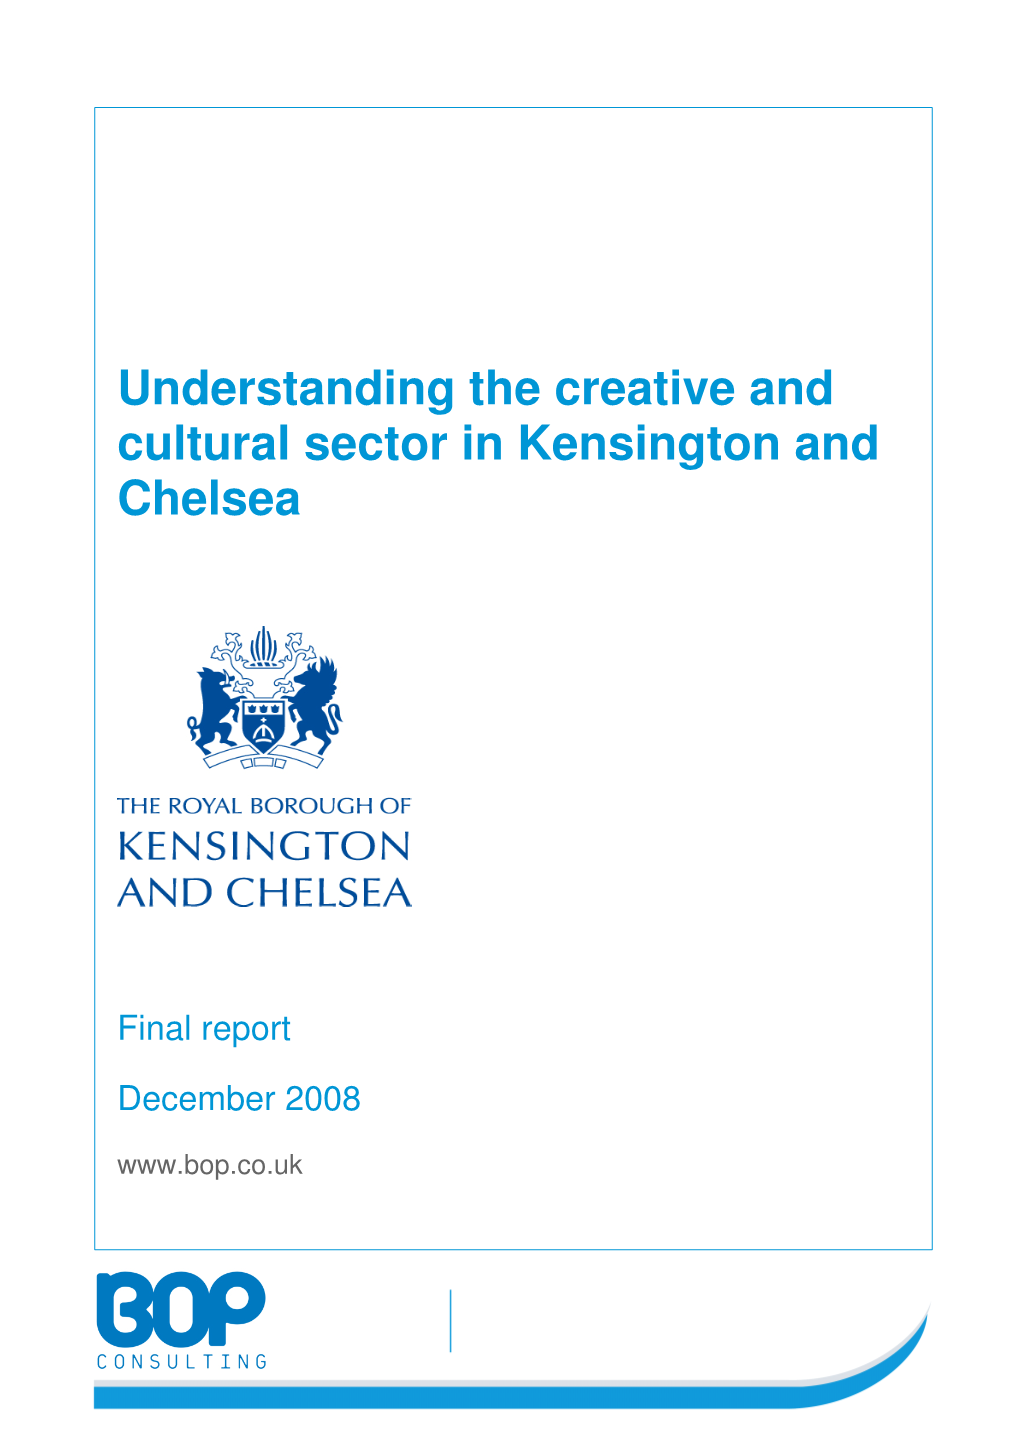 Understanding the Creative and Cultural Sector in Kensington and Chelsea